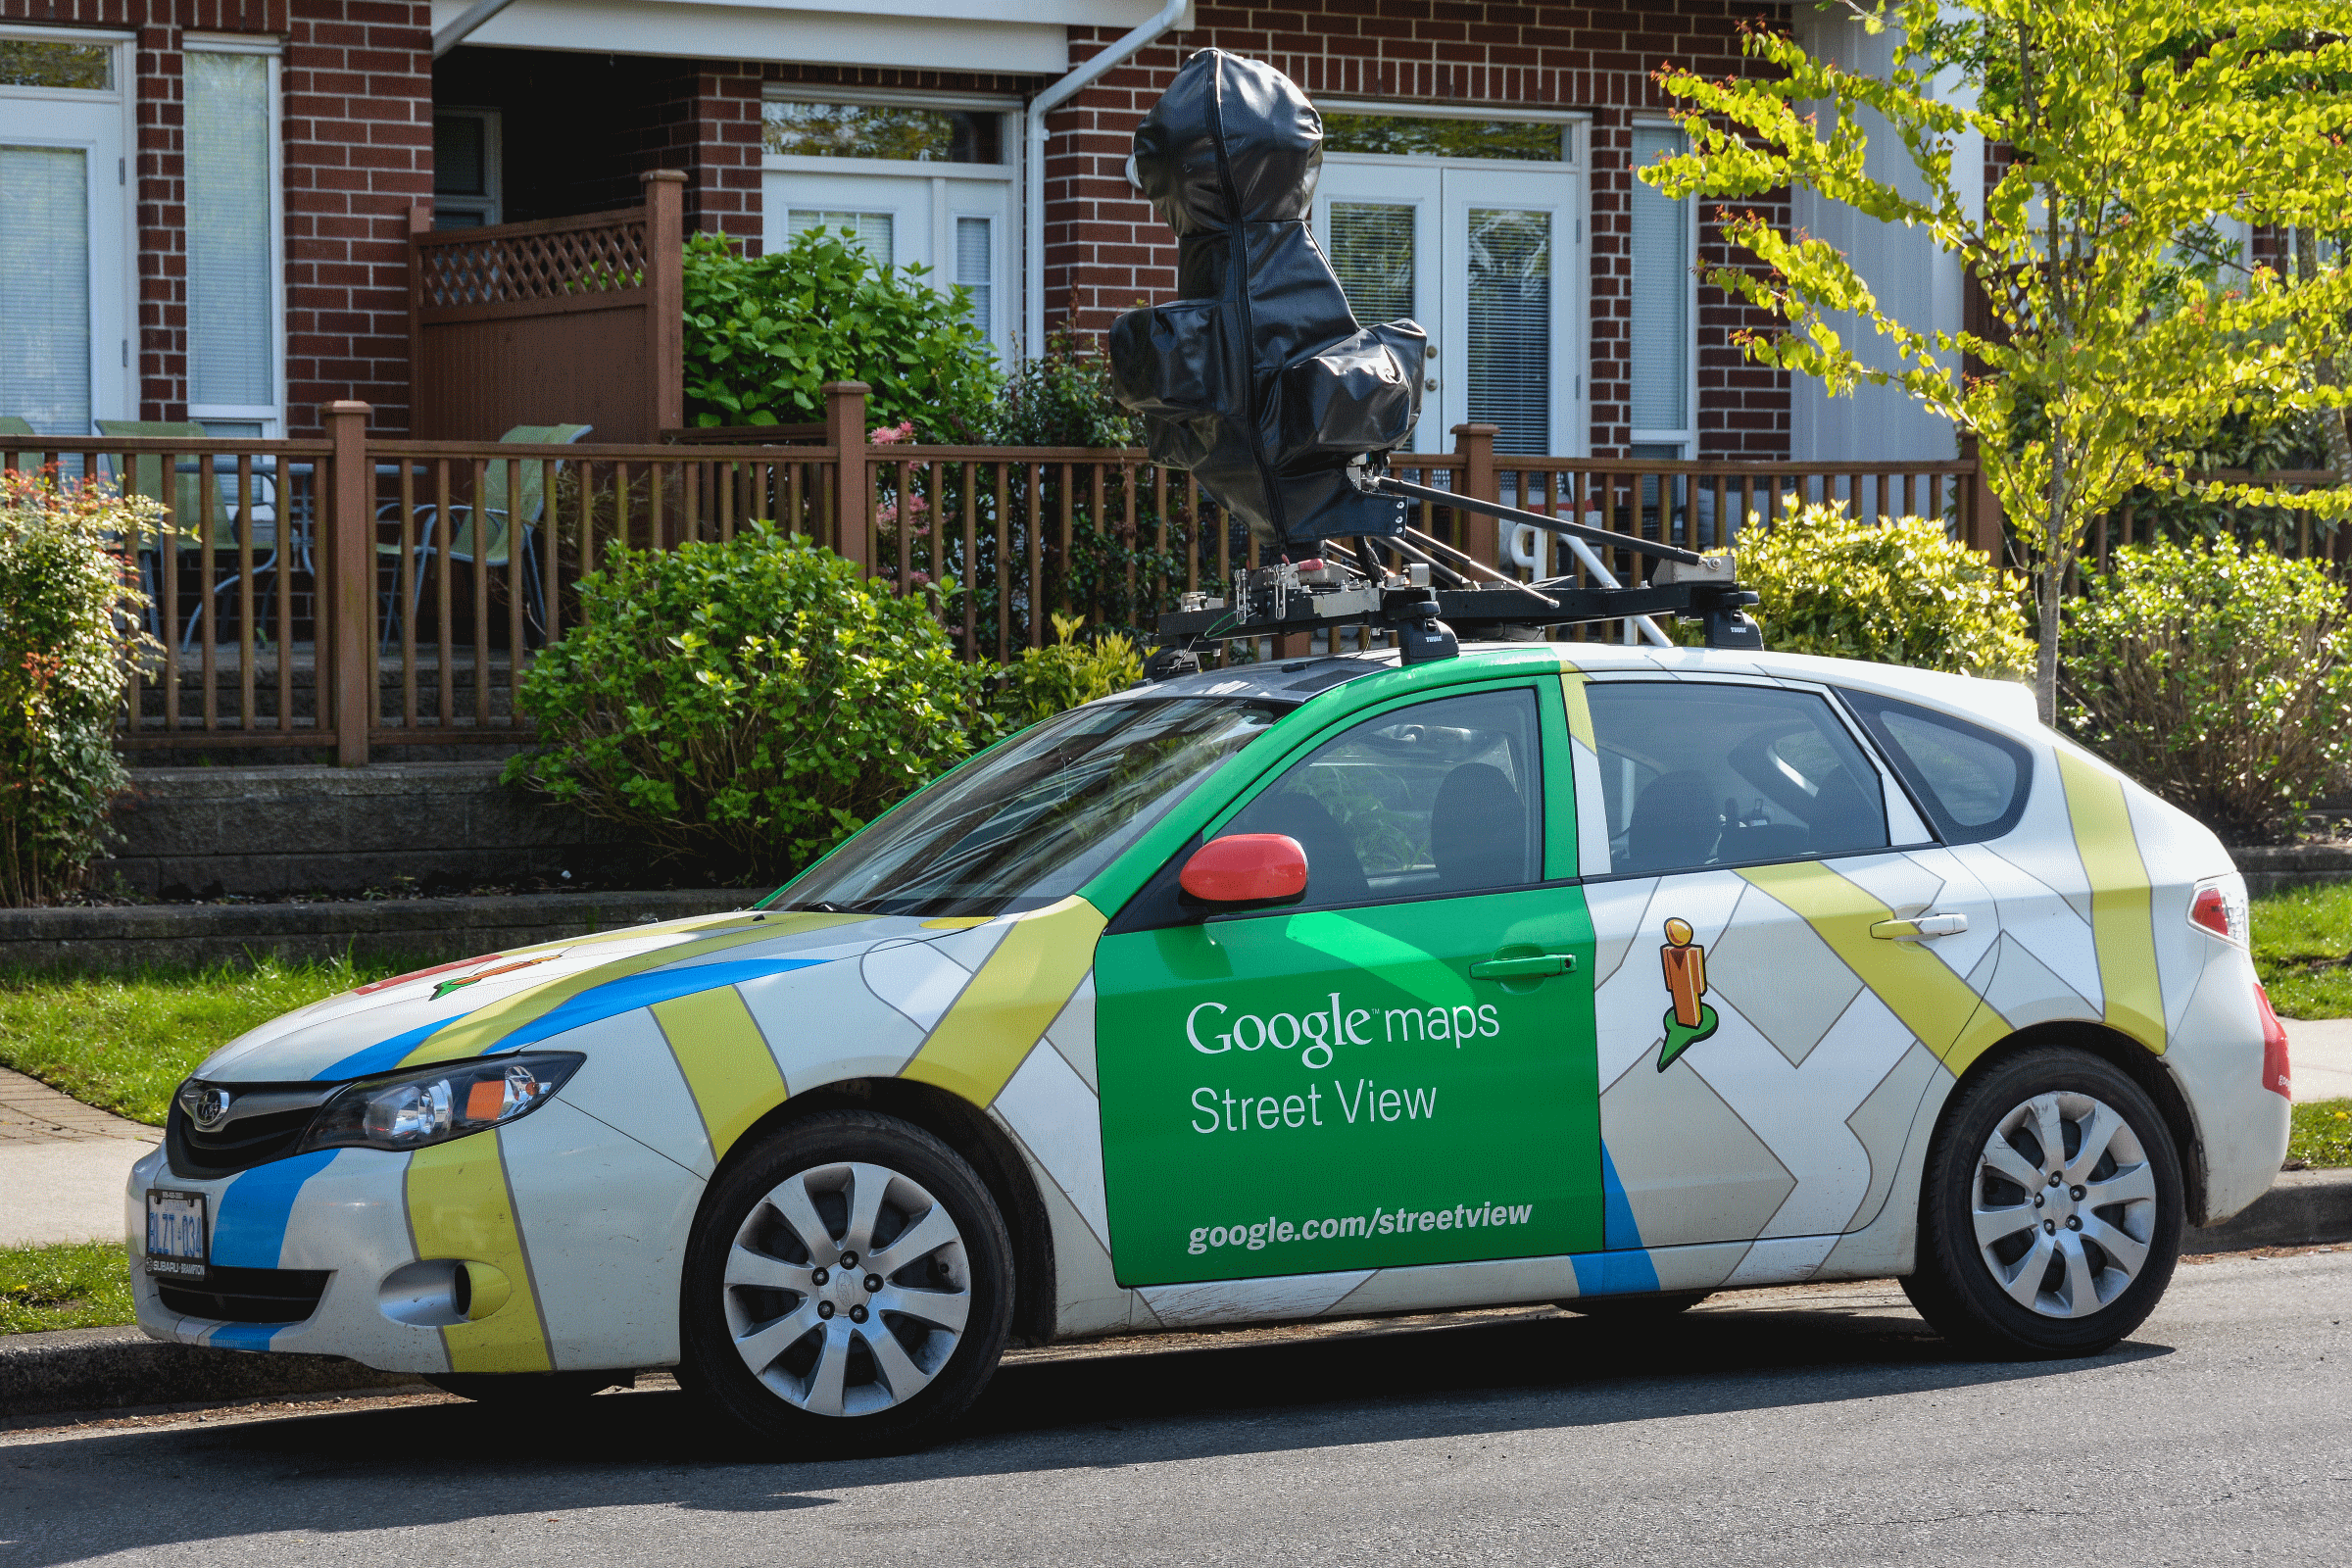 A 360 degree camera mounted on a vehicle is used for collecting street view imagery for Google™ Maps [@leggett_google_2014]. CC-BY-SA-4.0.